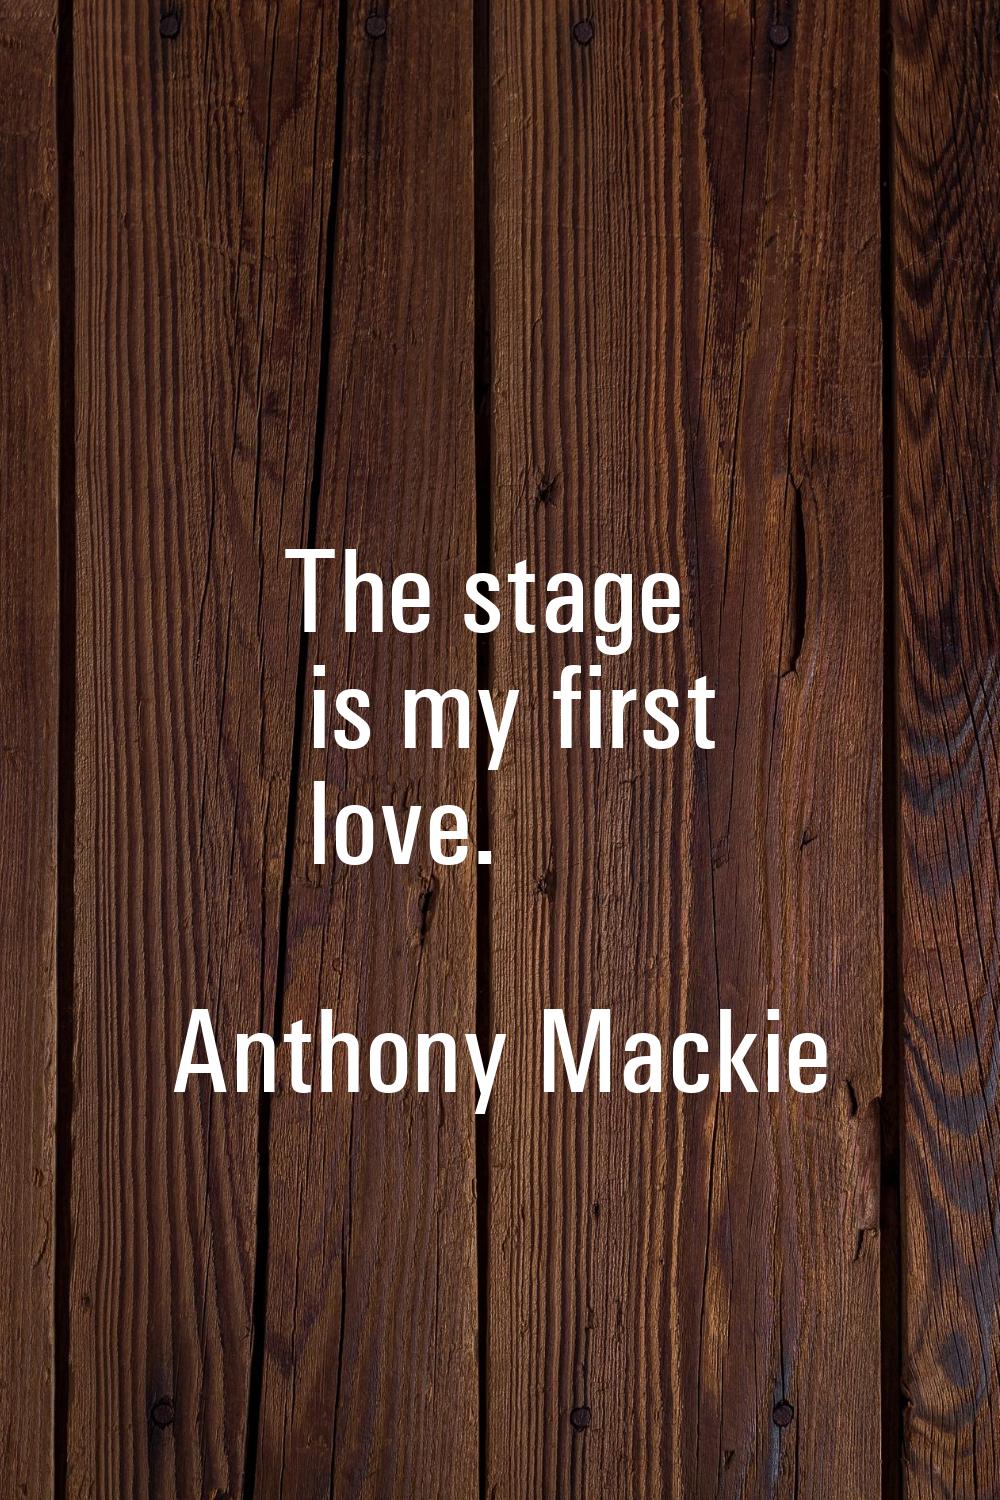 The stage is my first love.